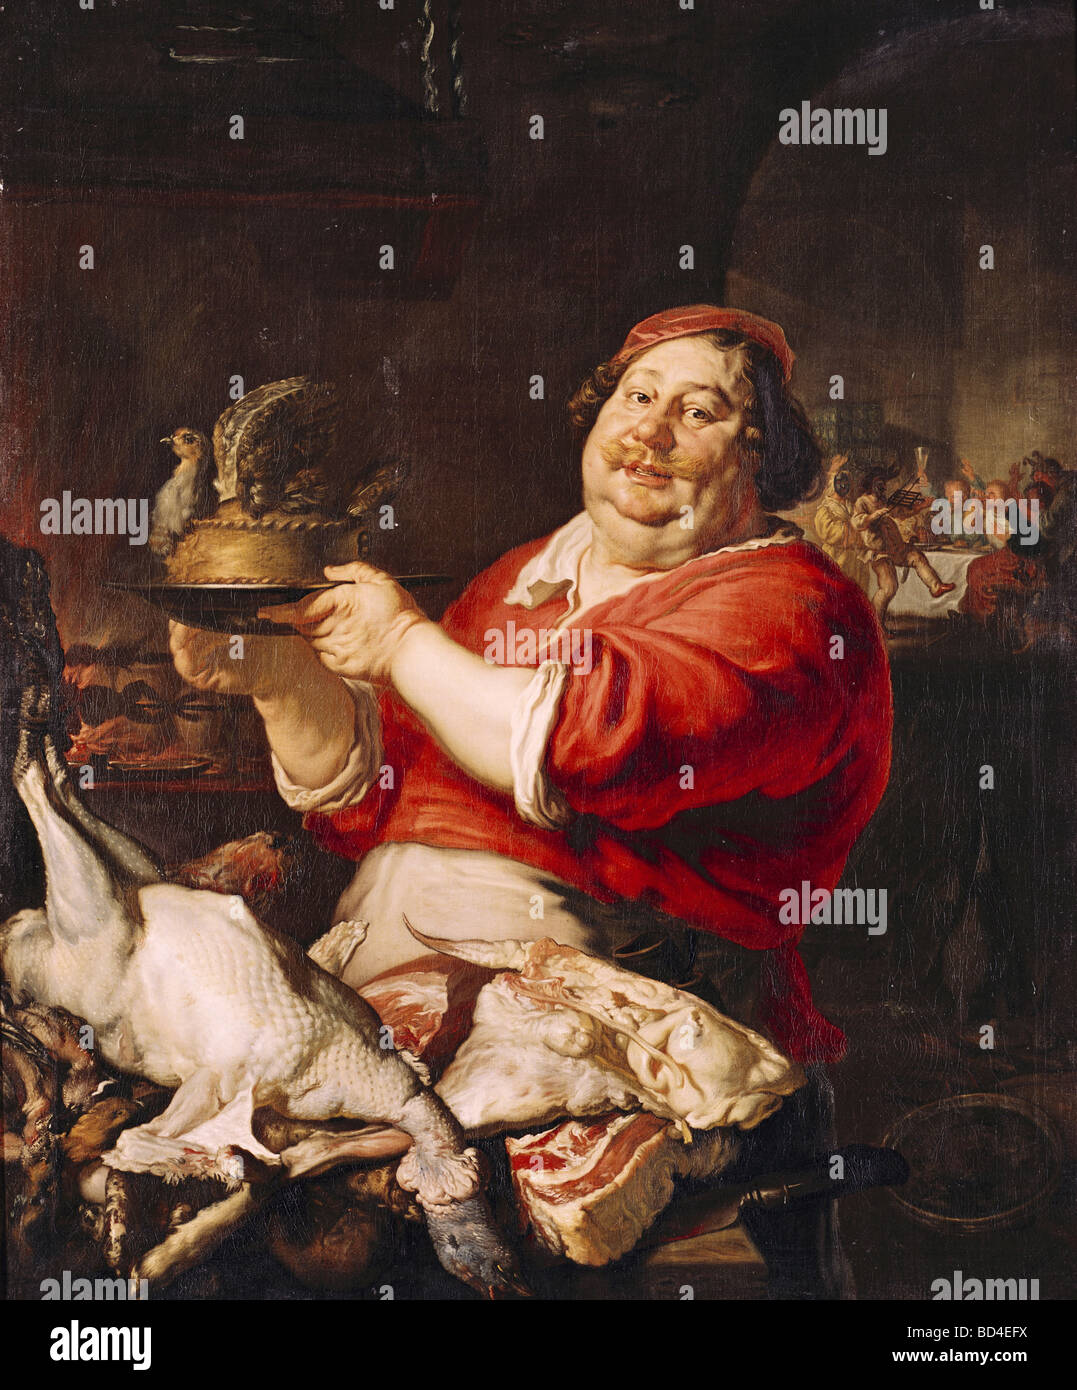 fine arts, Sandrart, Joachim, (1606 - 1688), painting, 'Allegory of the Month of February', 1642 / 1643, oil on canvas, Altes Stock Photo